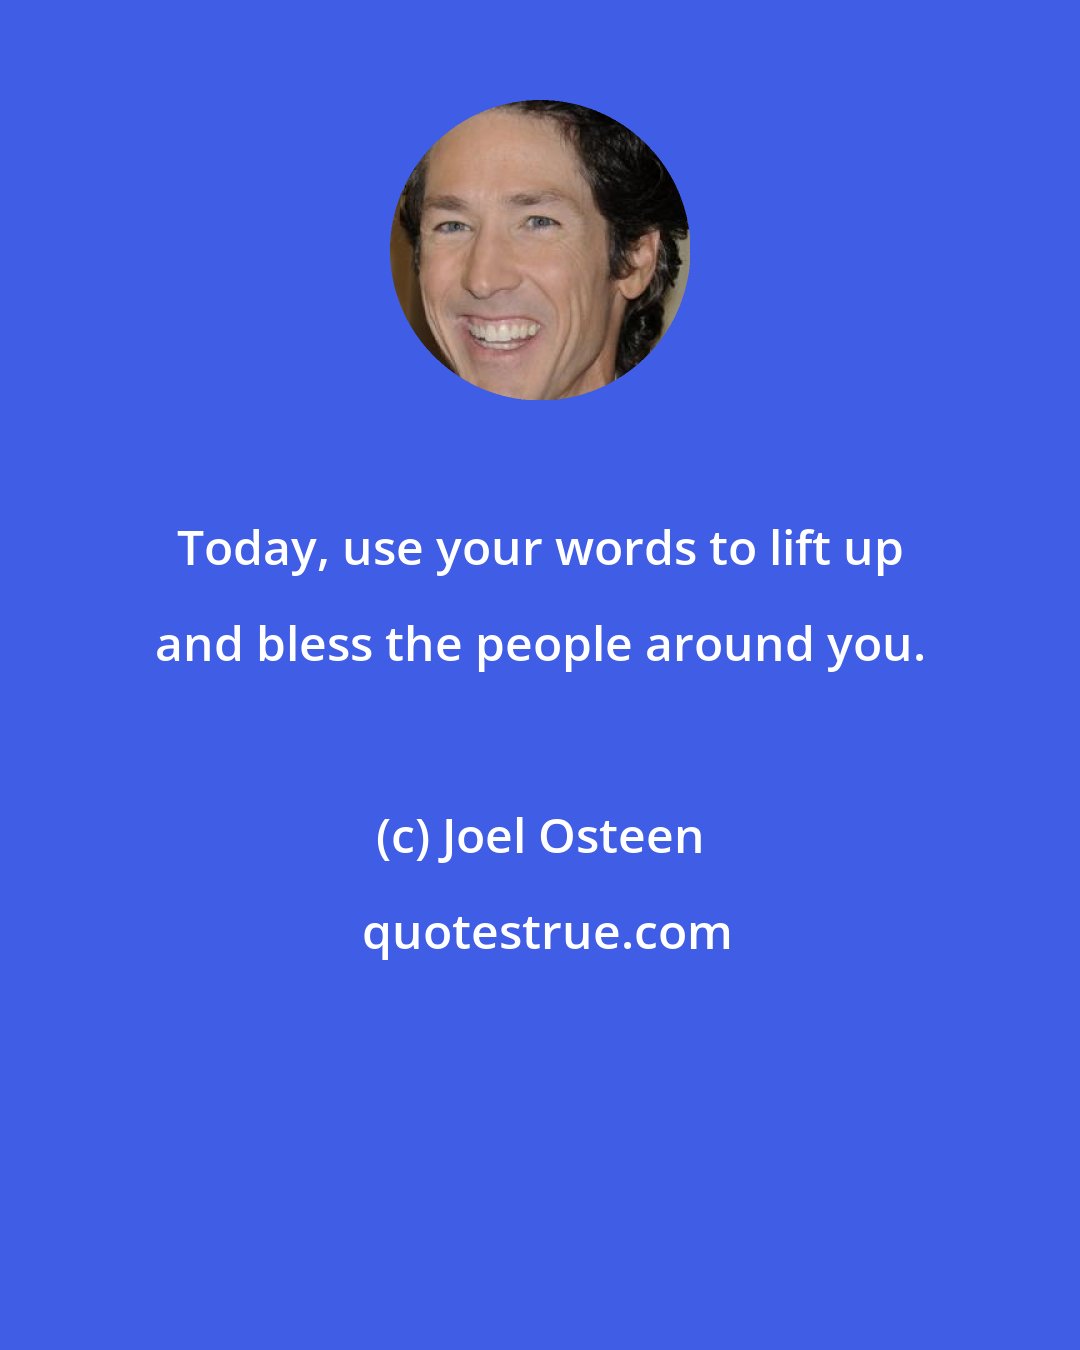 Joel Osteen: Today, use your words to lift up and bless the people around you.